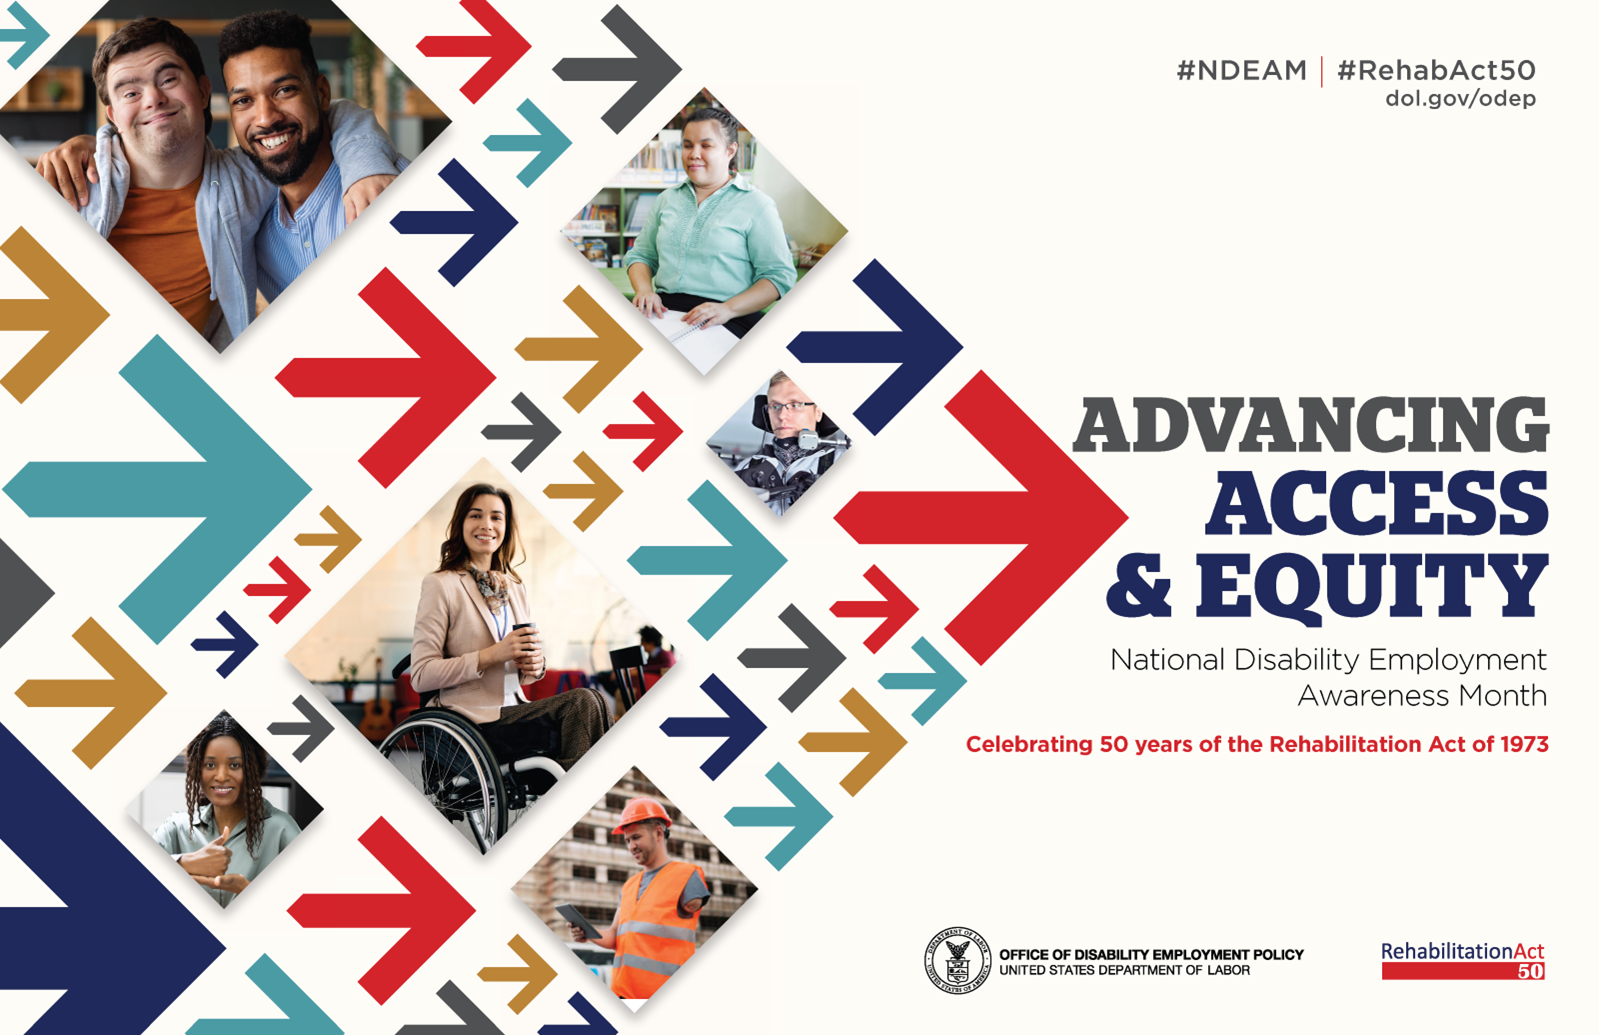 023 NDEAM theme is “Advancing Access and Equity” to honor the 50th Anniversary of the passage of the Rehabilitation Act of 1973